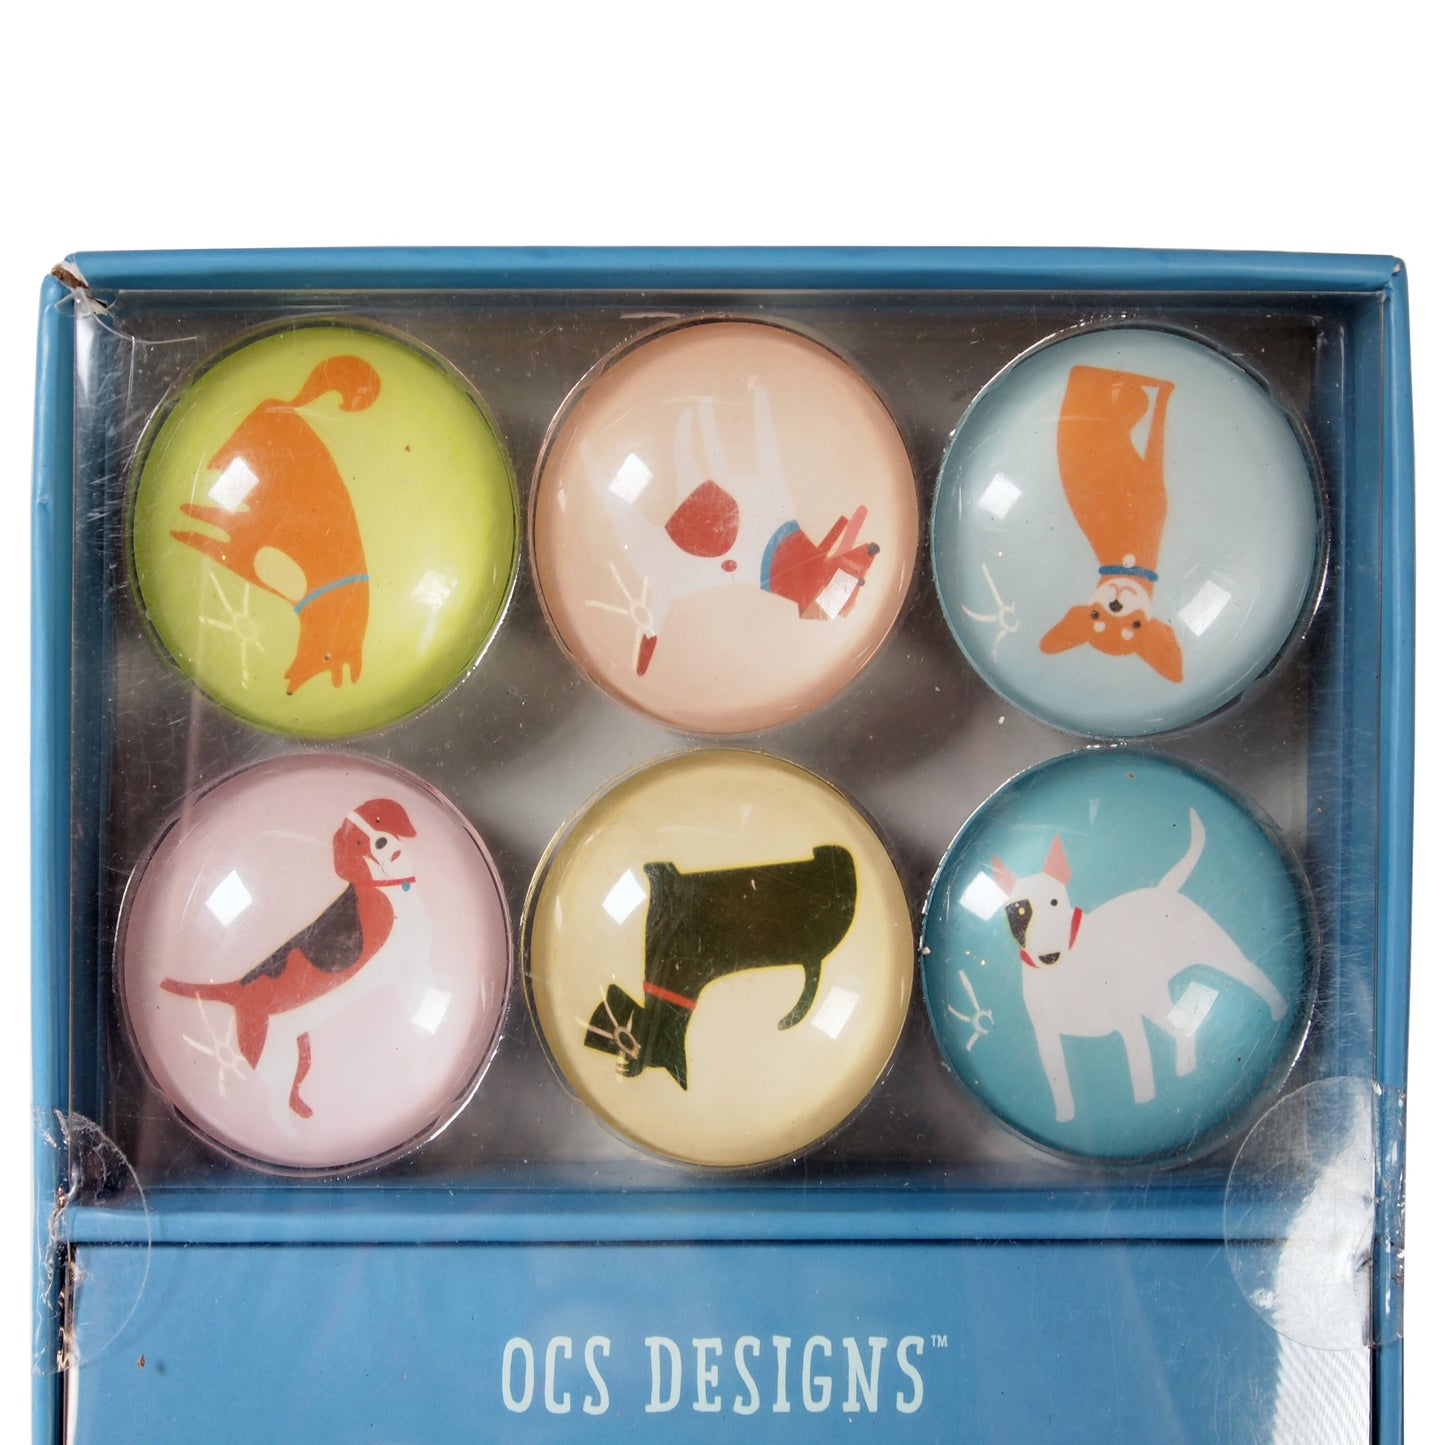 OCS Designs : Set of 6 Dog-Themed Glass Magnets - LEAGUE OF CRAFTY CANINES